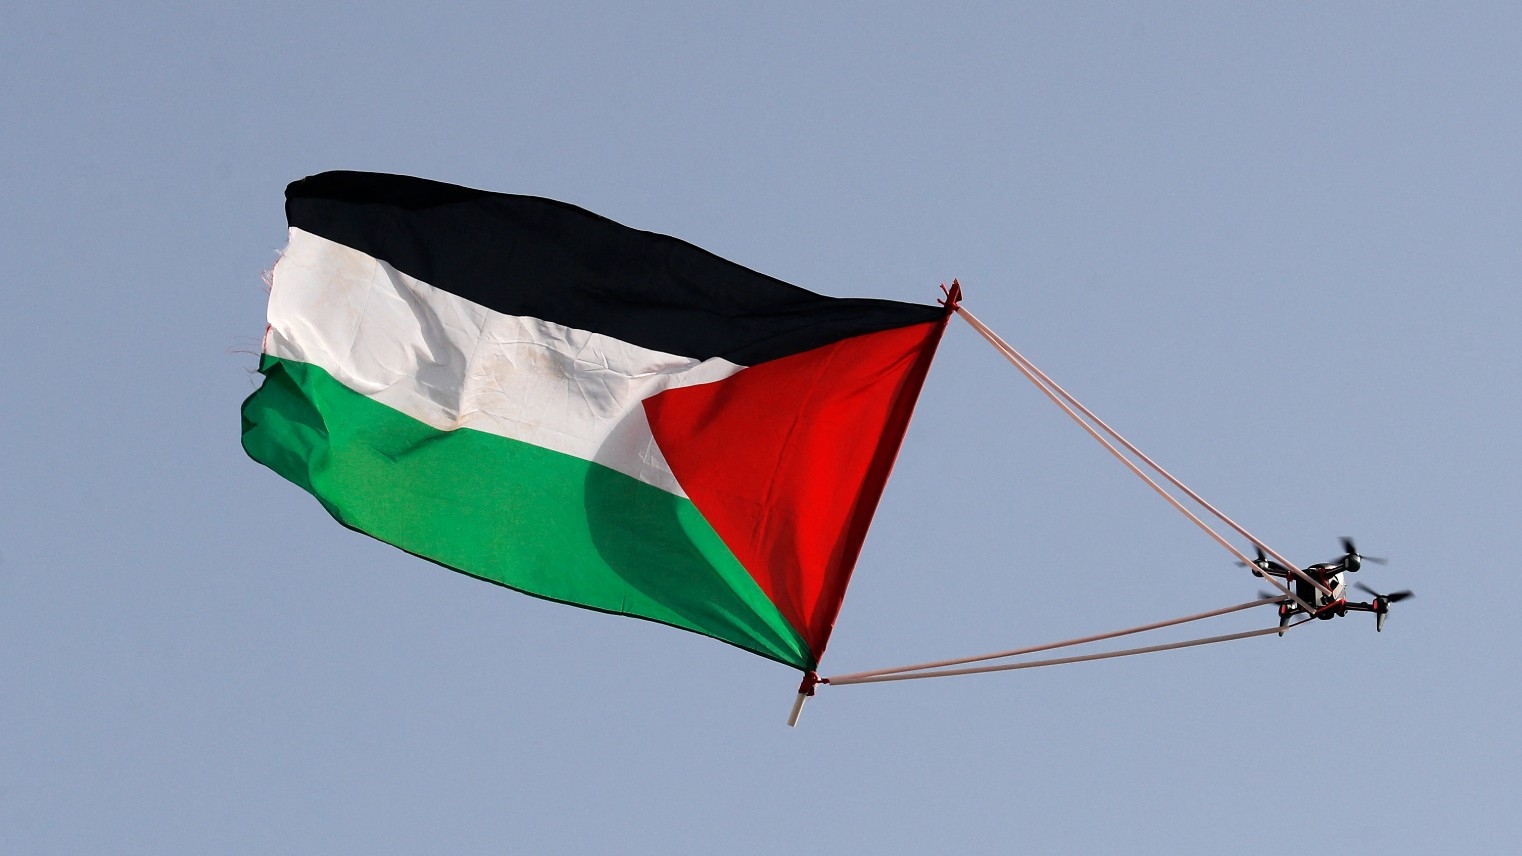 A Palestinian flag hanging from a civilian drone flies over Jerusalem during the Israeli 'flags march' to mark "Jerusalem Day" on 29 May, 2022 (AFP)